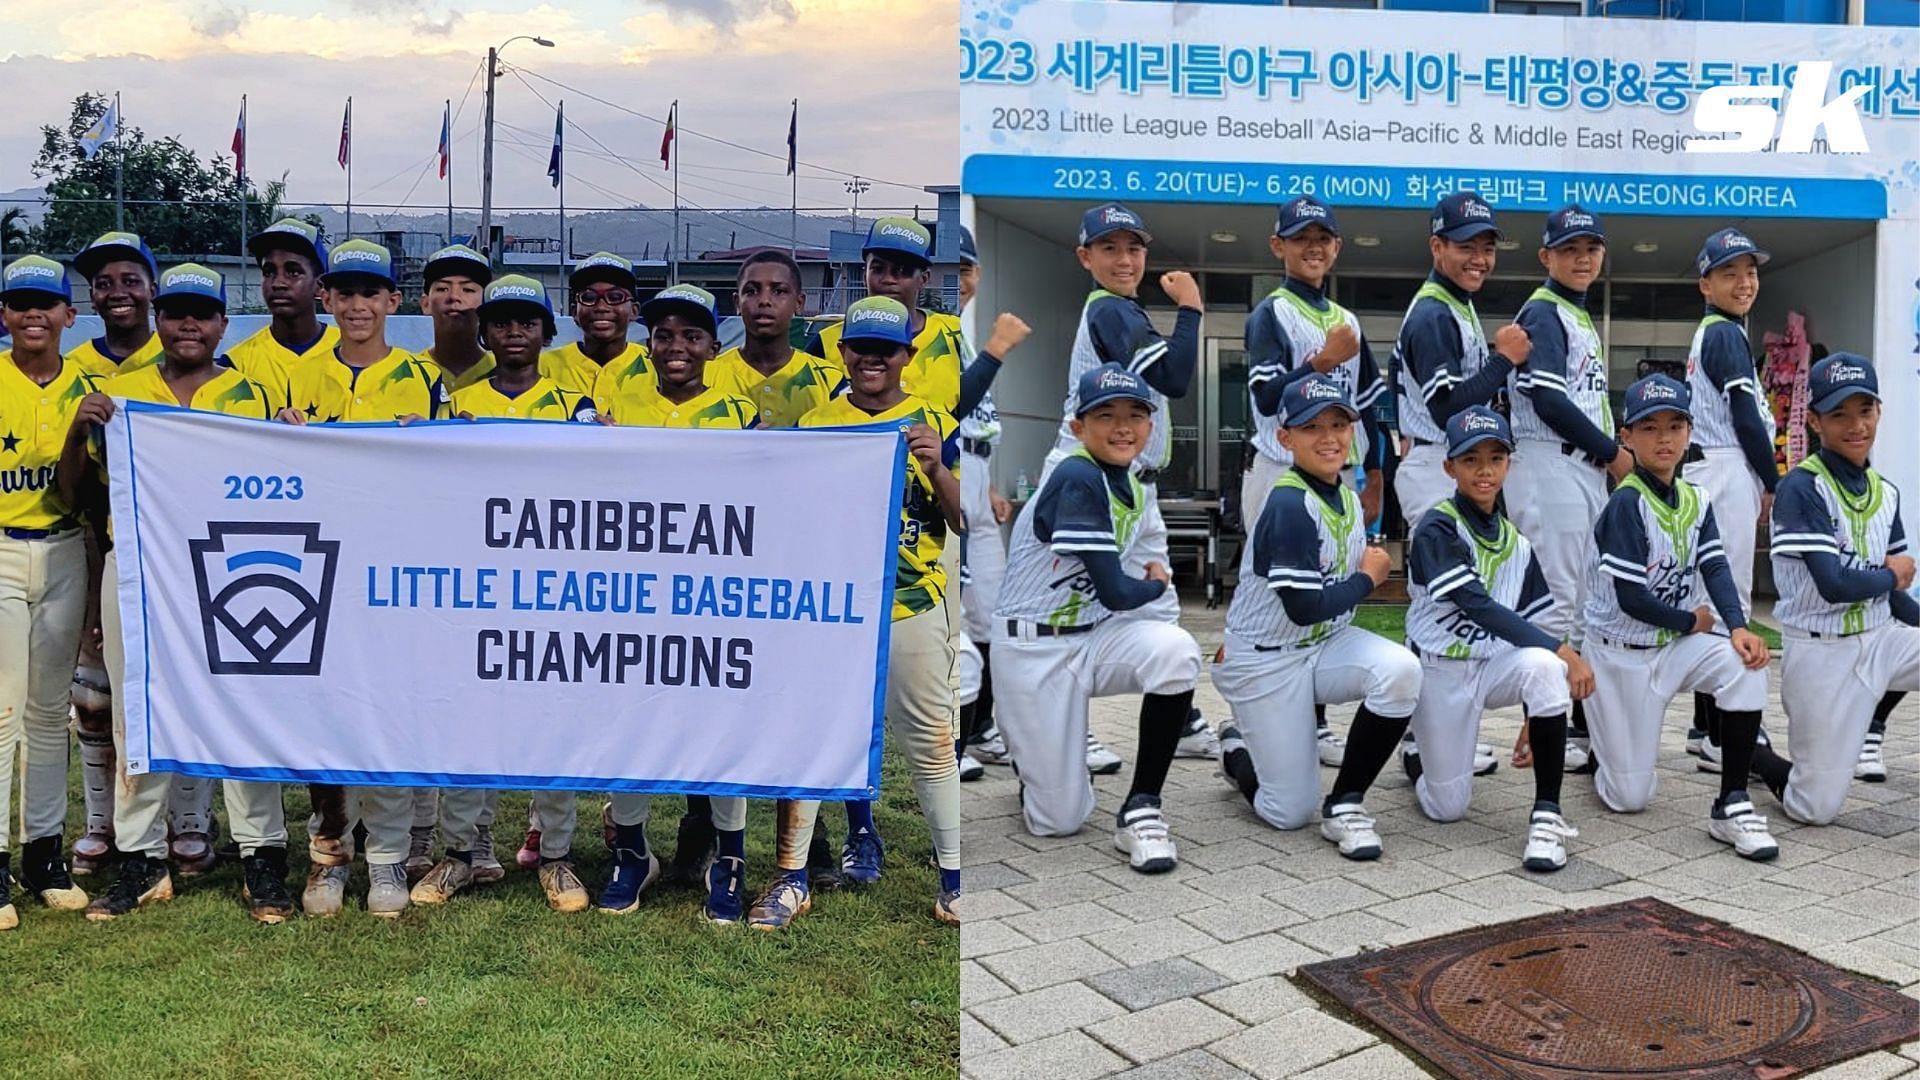 Little League Baseball World Series 2023 schedule Asia-Pacific vs Caribbean Little League Baseball World Series 2023 International Championship Venue, Start time, TV and streaming details